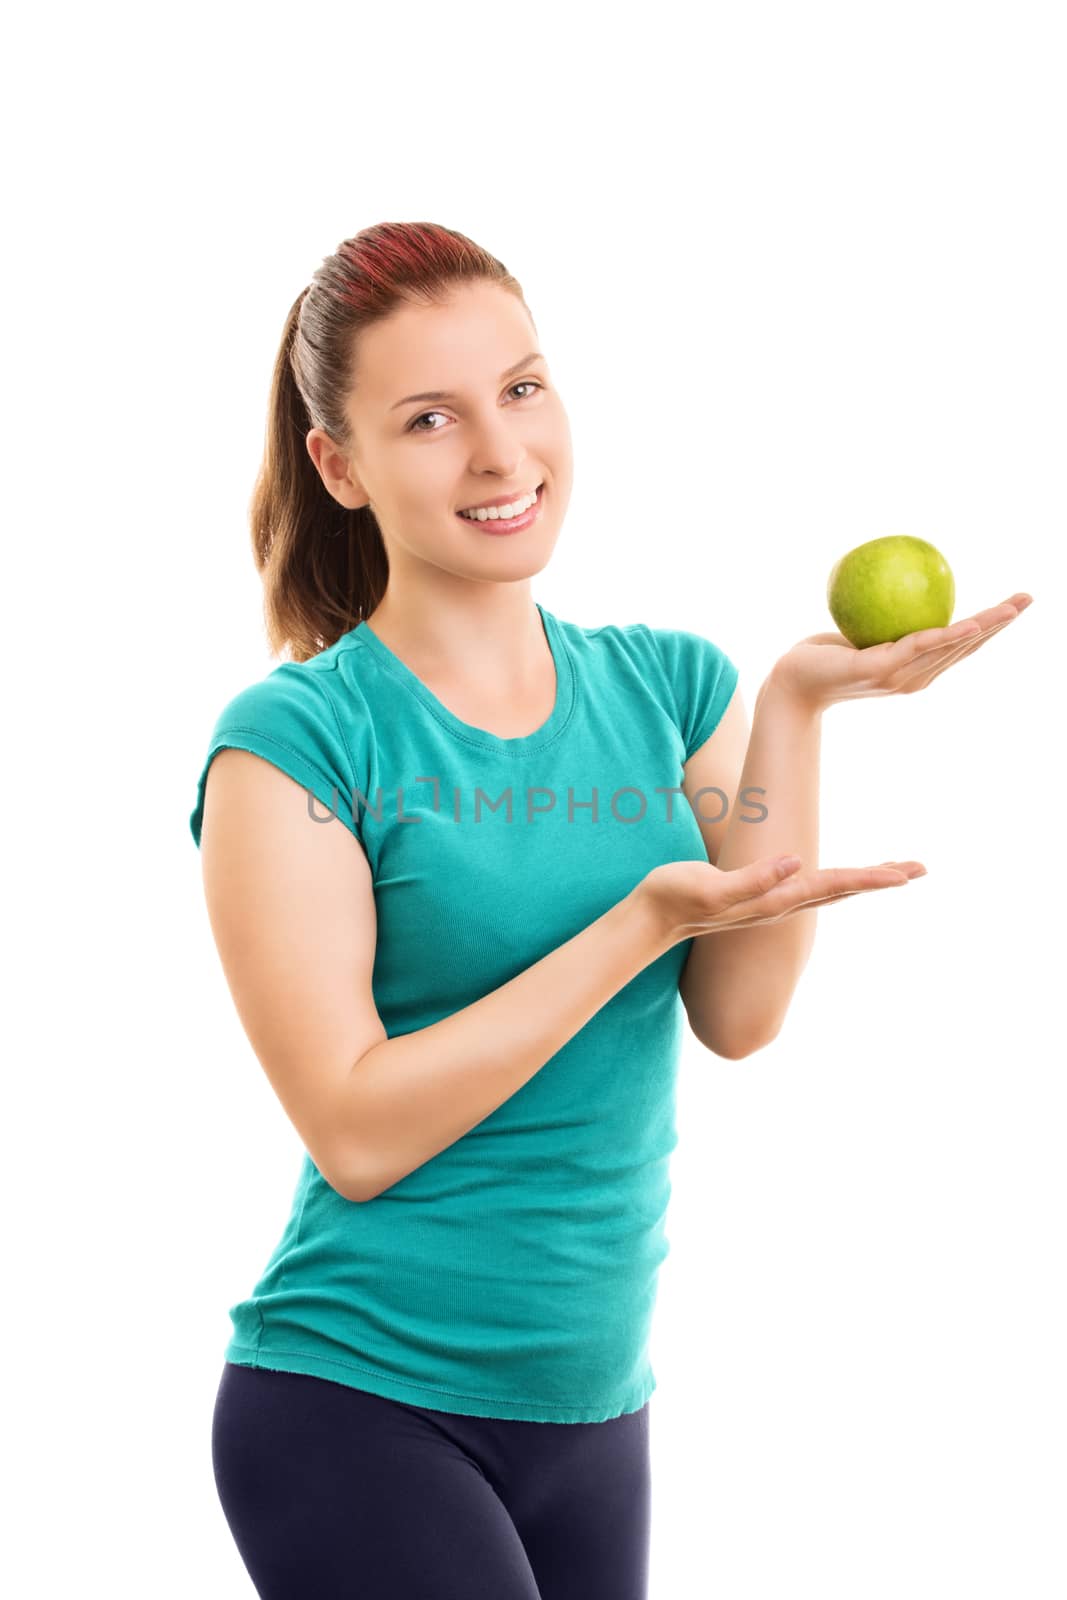 Female athlete holding a green apple by Mendelex